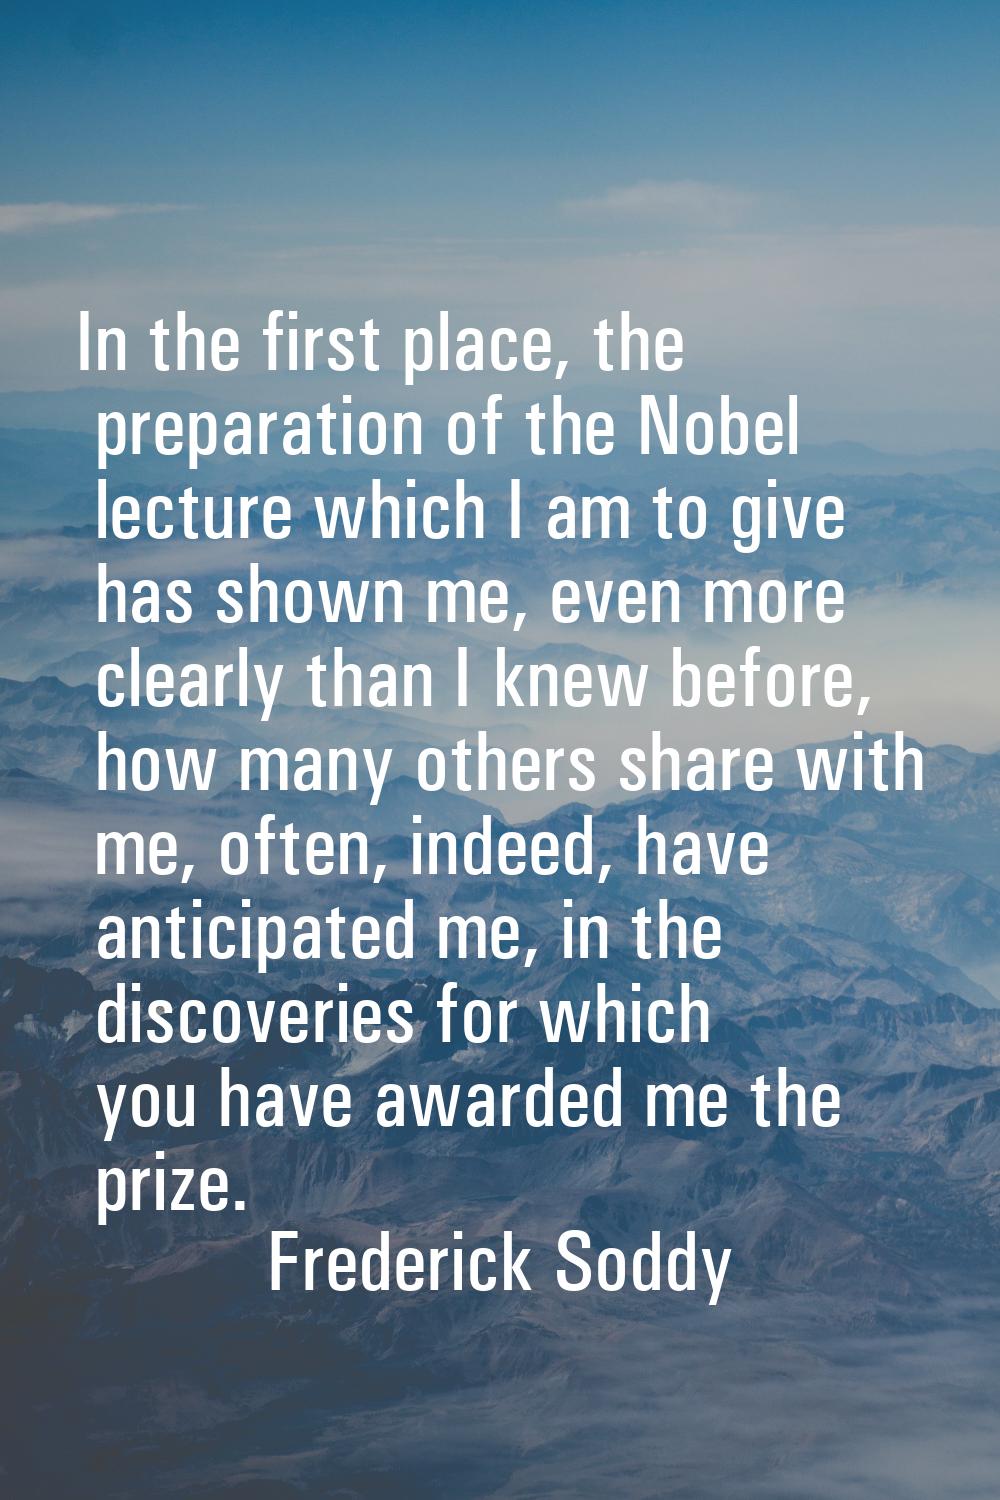 In the first place, the preparation of the Nobel lecture which I am to give has shown me, even more